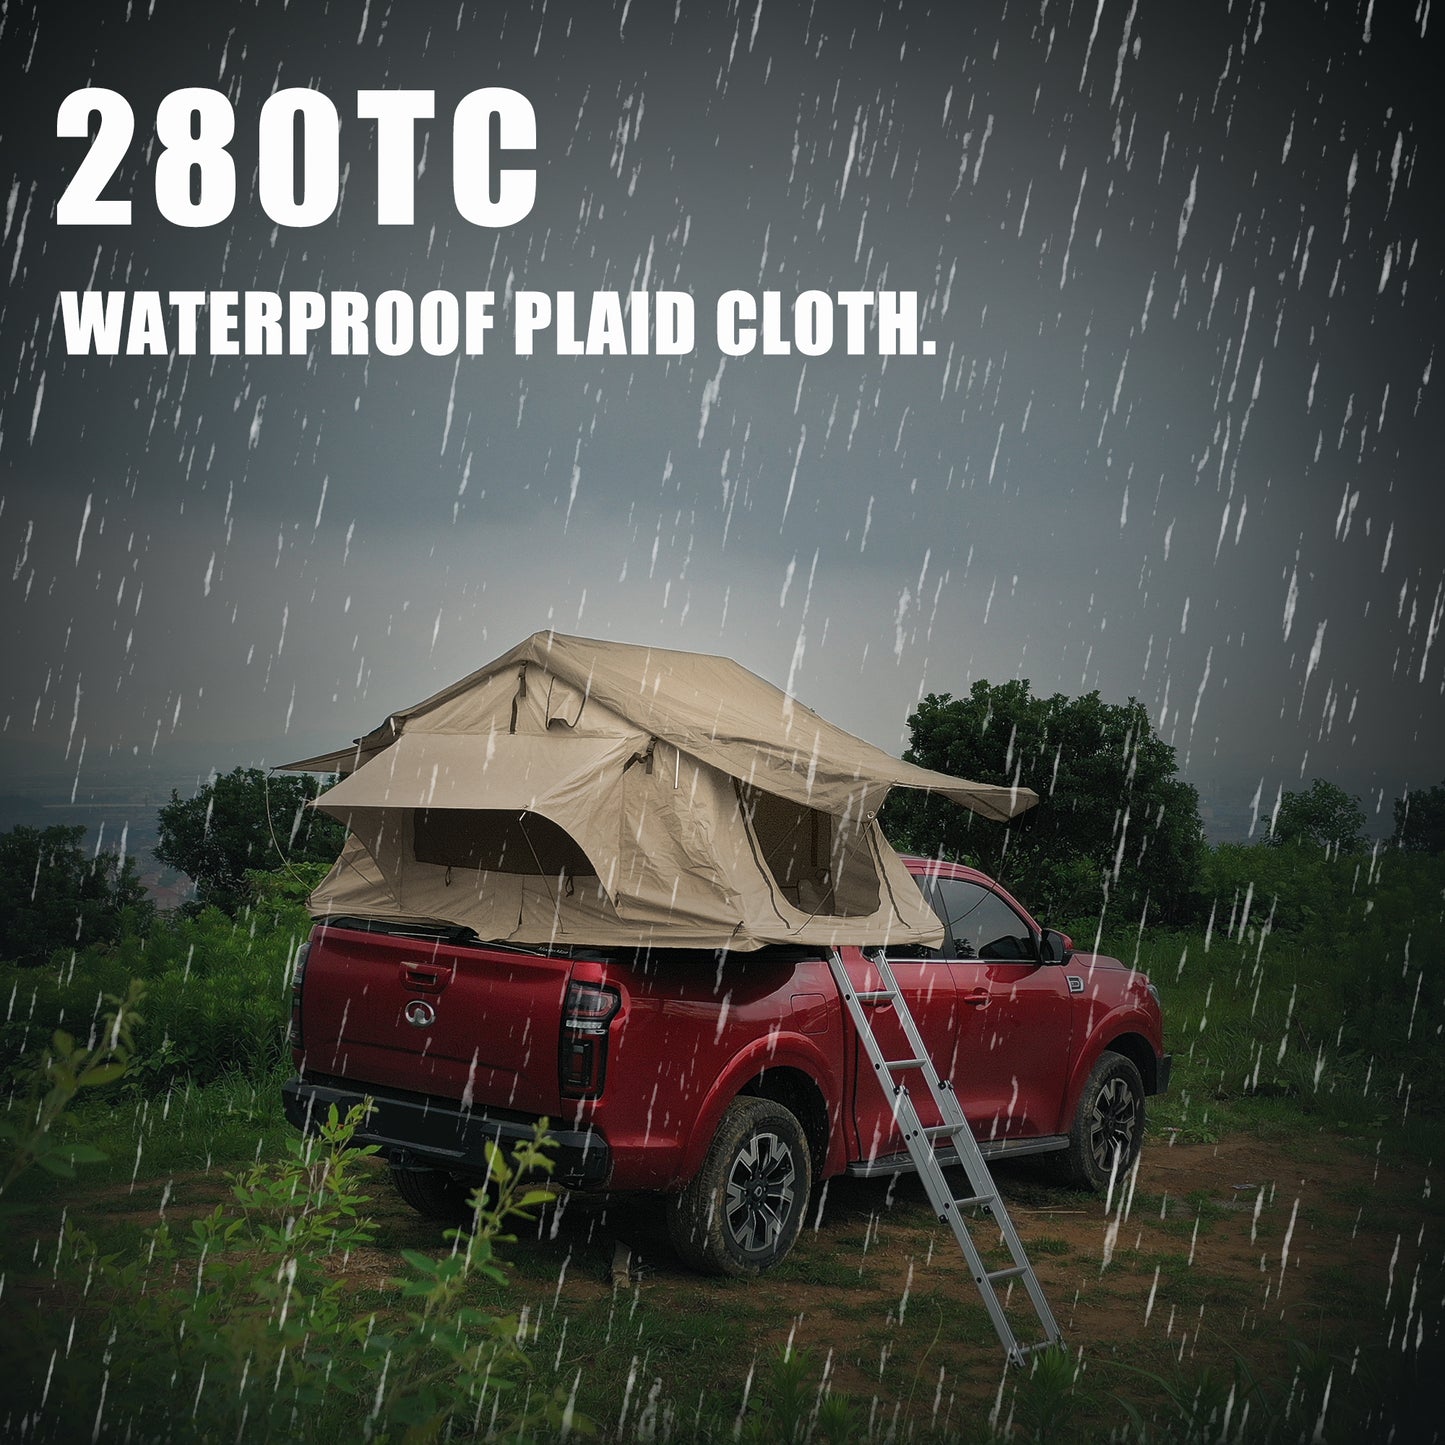 The roof tent with 280TC 2000 waterproof lattice cloth for using as a Camping Necessity A Mobile Home